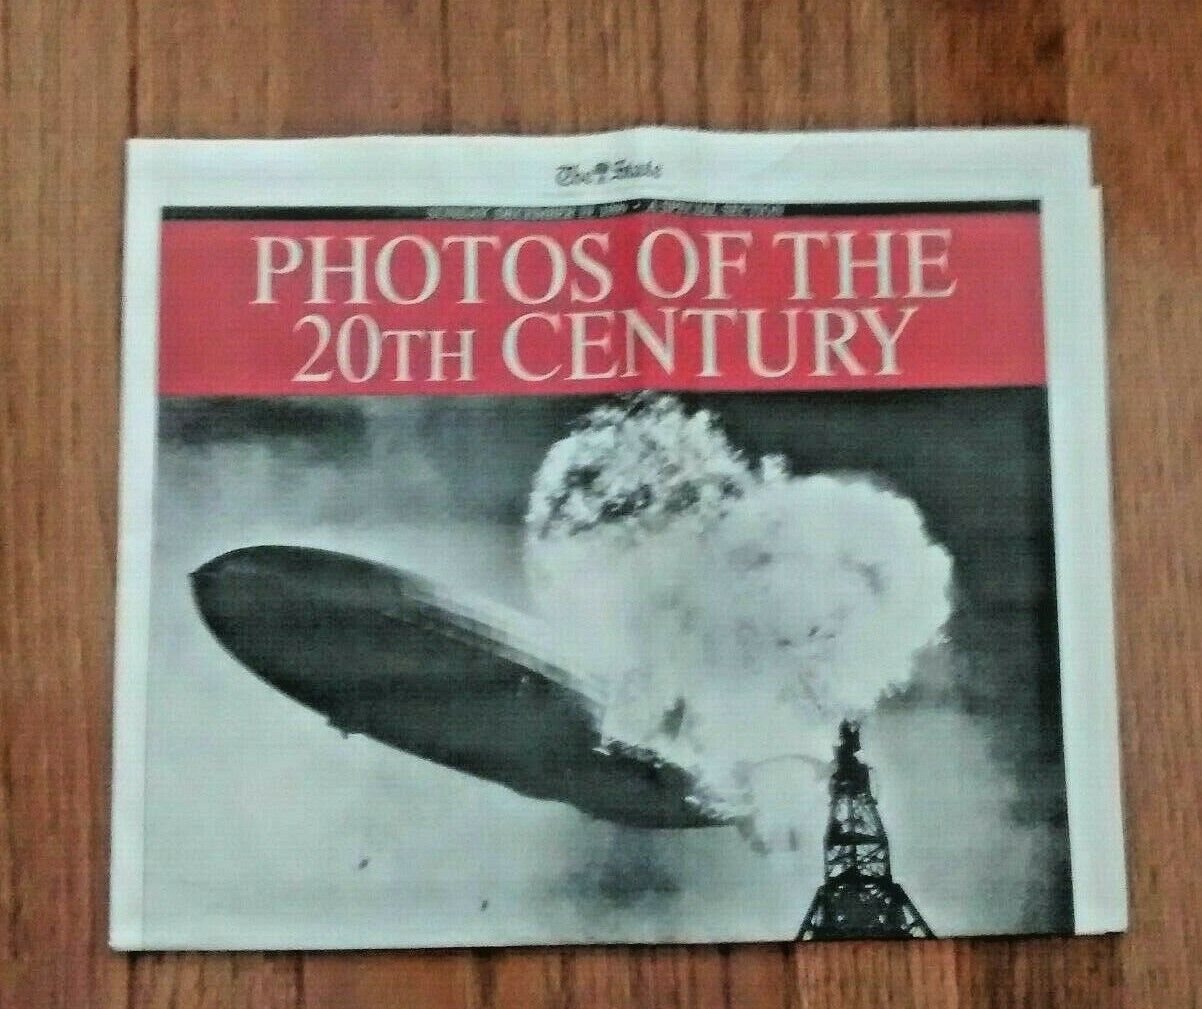 12-19-1999 The State Newspaper : PHOTOS OF THE CENTURY Past 100 years